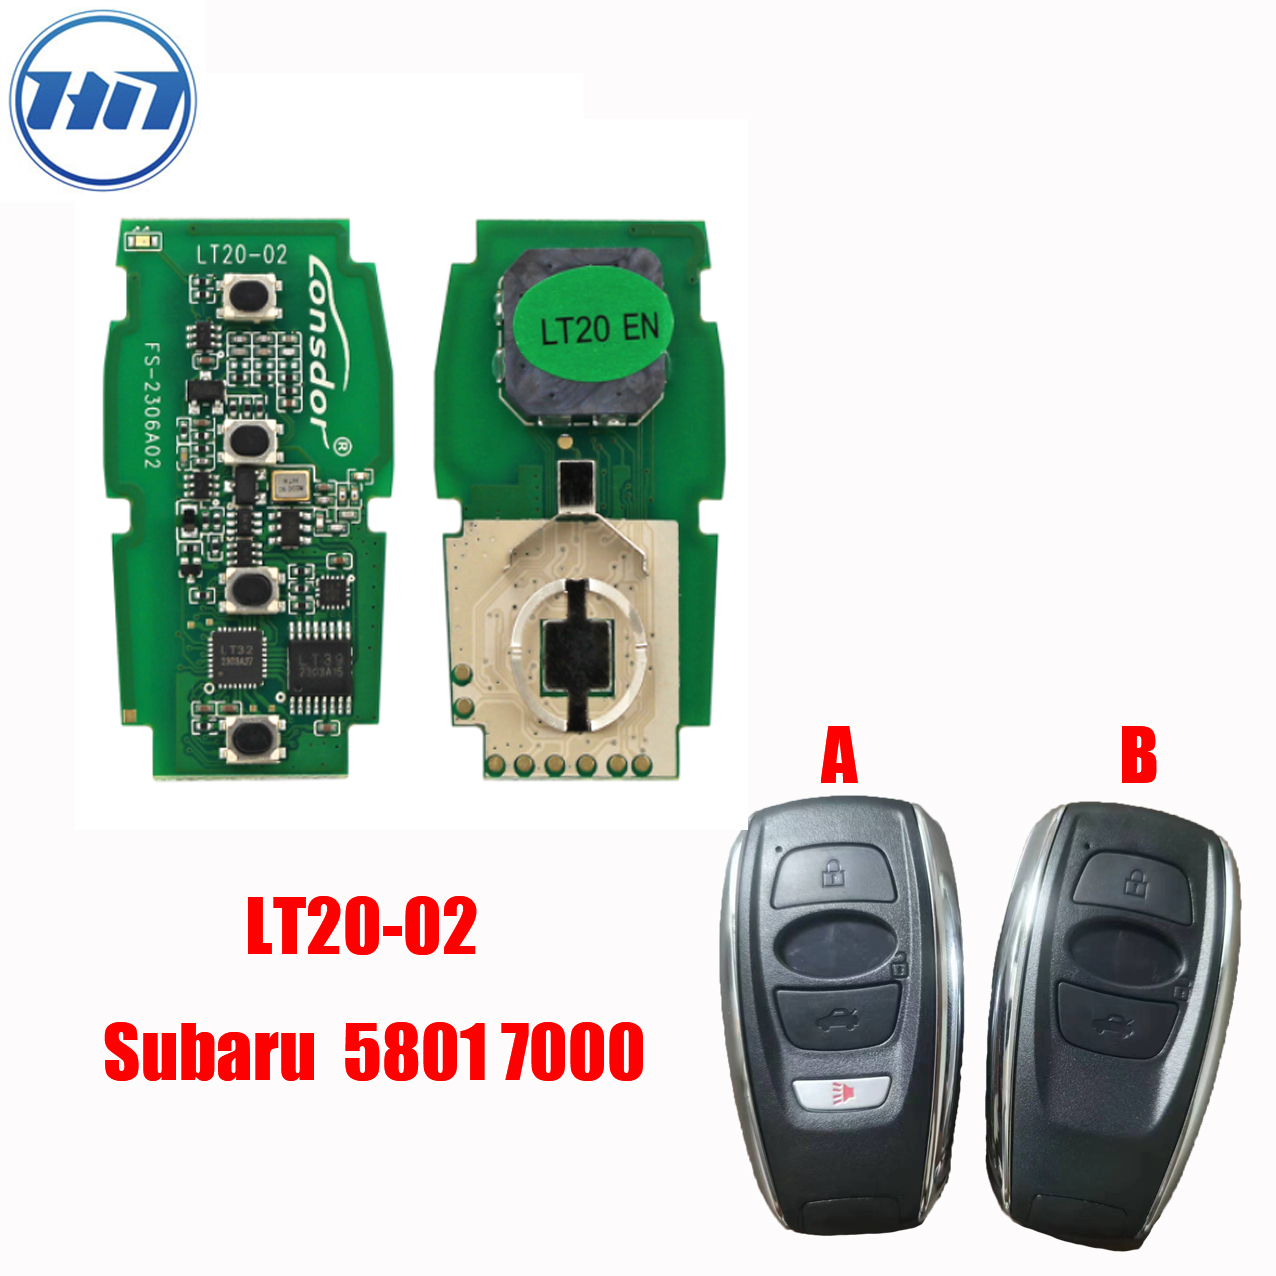 2023 New Lonsdor 8A+4D New Board LT20-02 For Subaru 5801/7000 Baord Smart Car Key Frequency Switchable K518/KH100+/k518ise